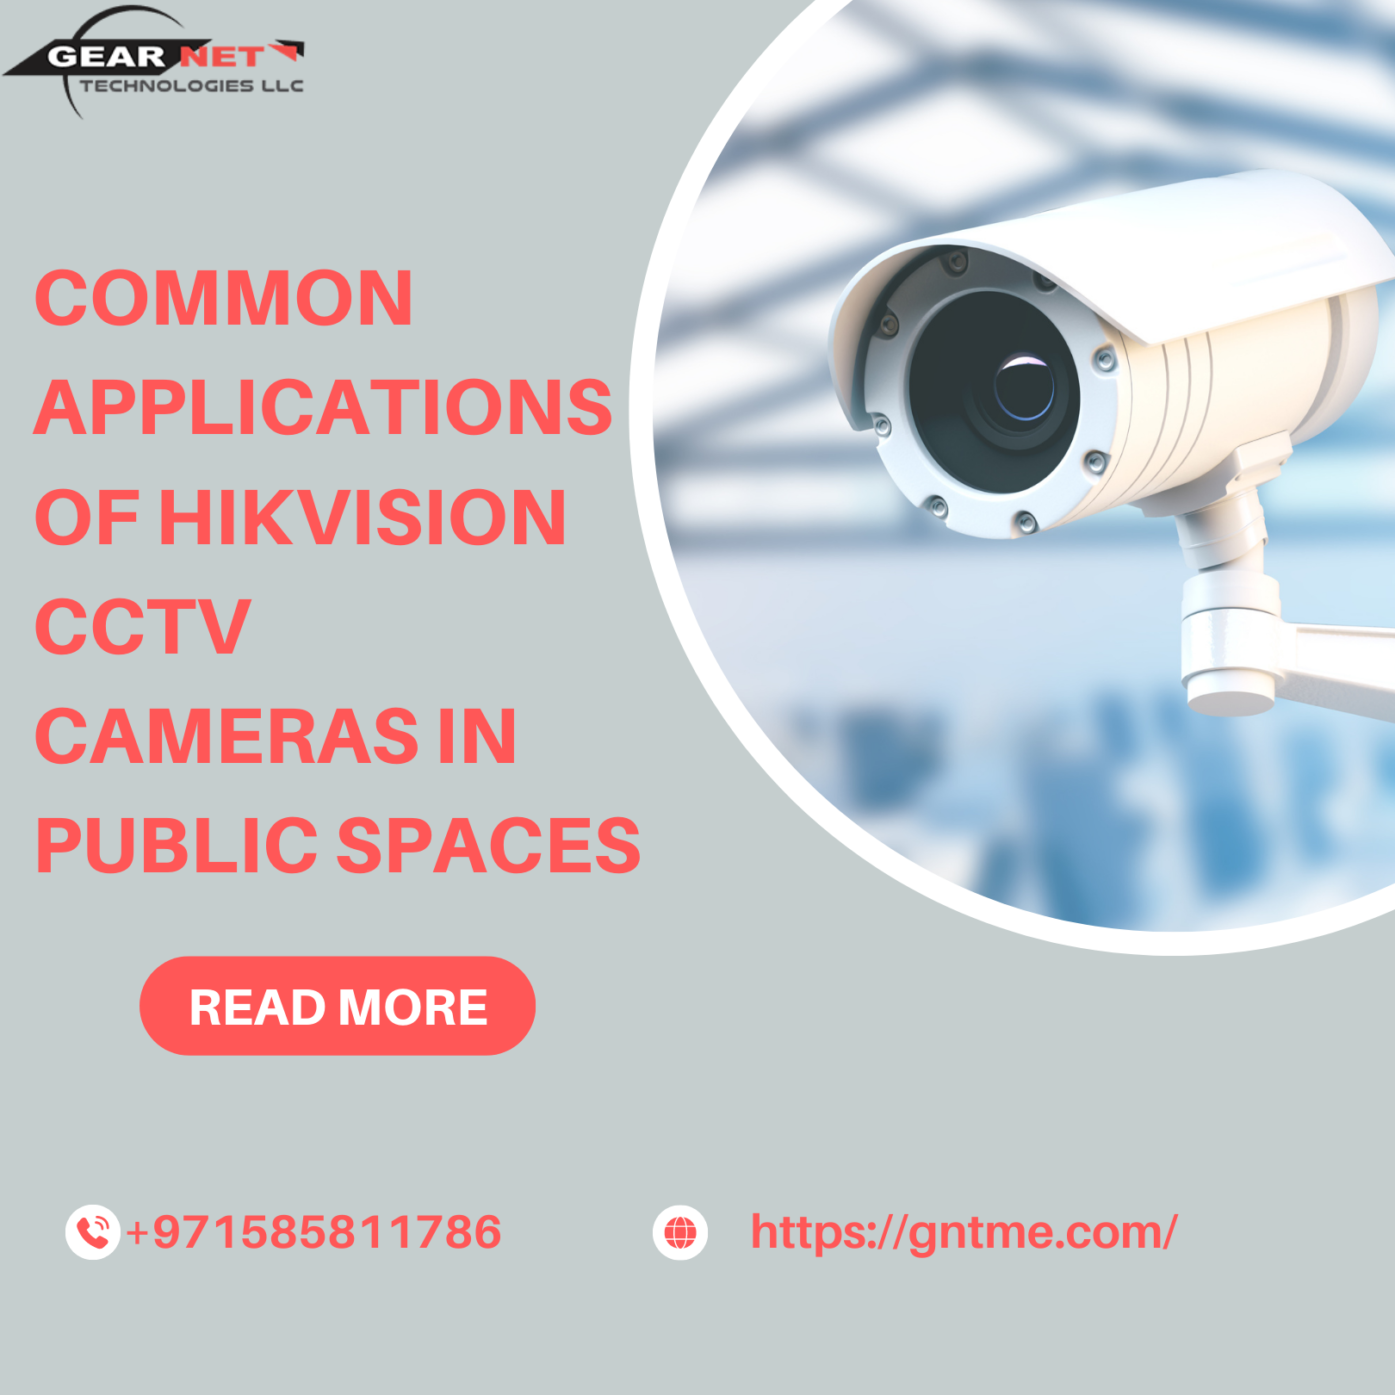 Common Applications of Hikvision CCTV Cameras in Public Spaces Gear Net Technologies LLC